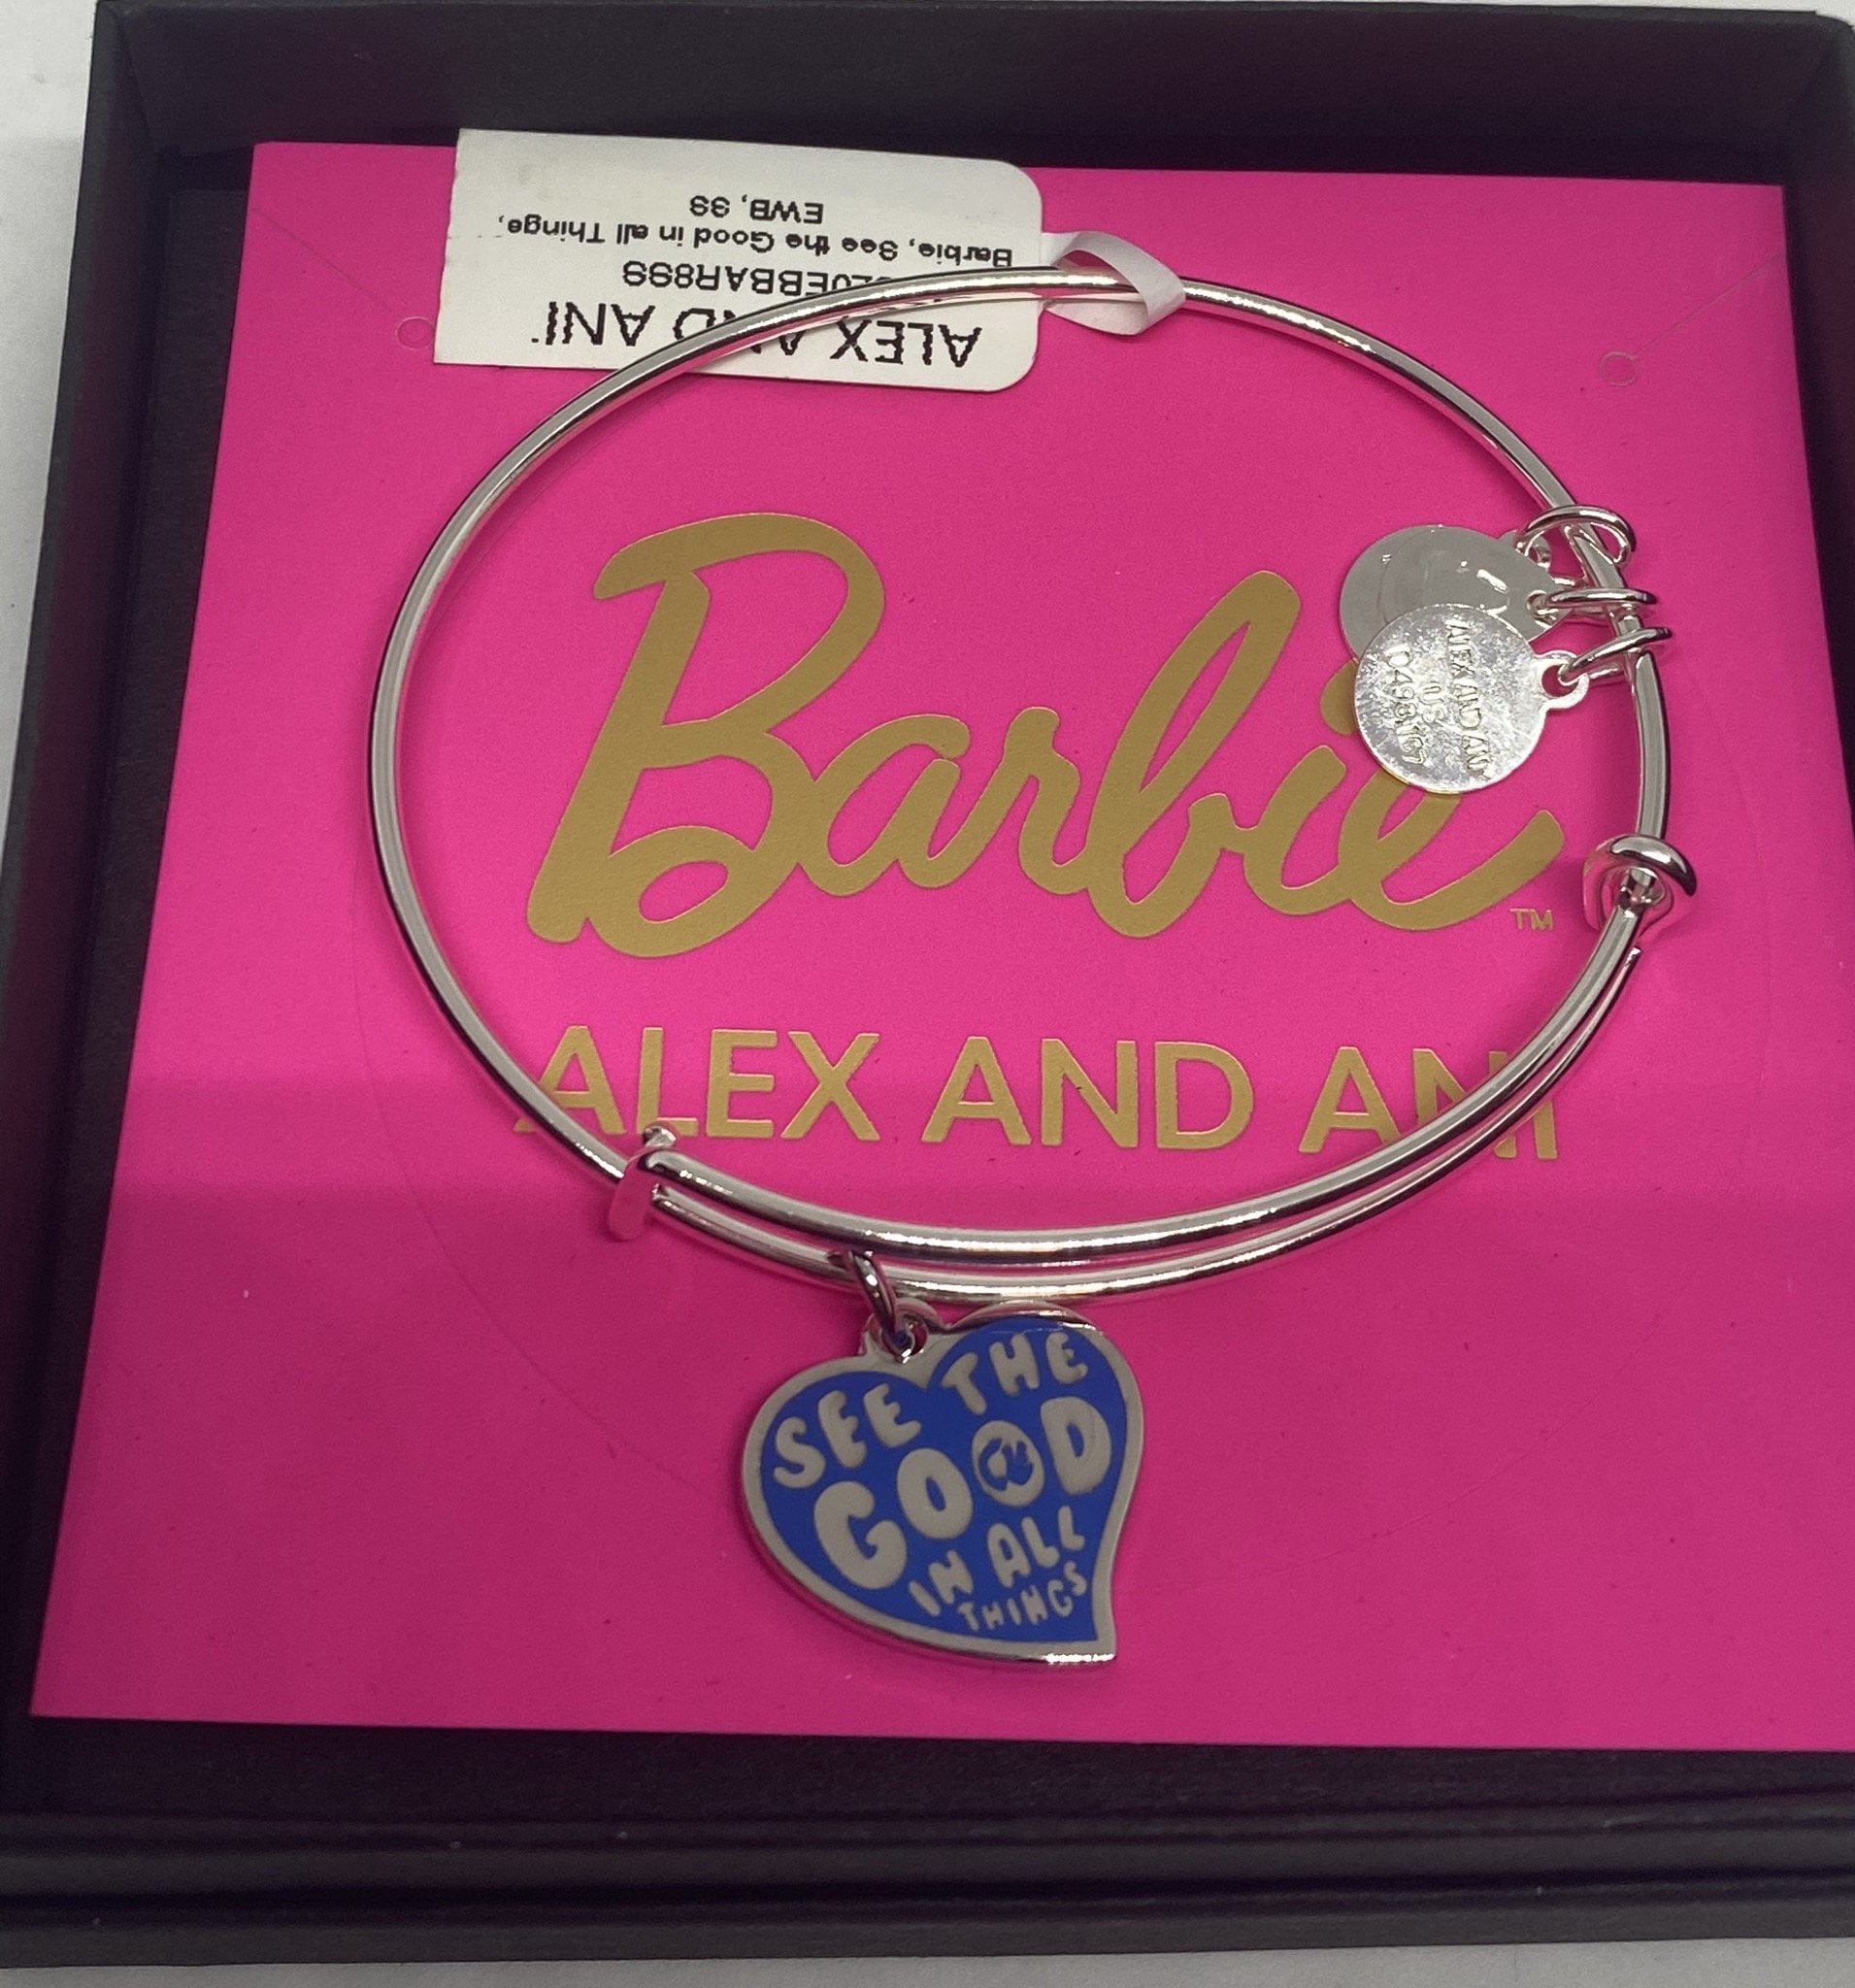 Alex and Ani Barbie Charm Bangle Bracelet Silver/See The Good in All Things  One Size - Walmart.com